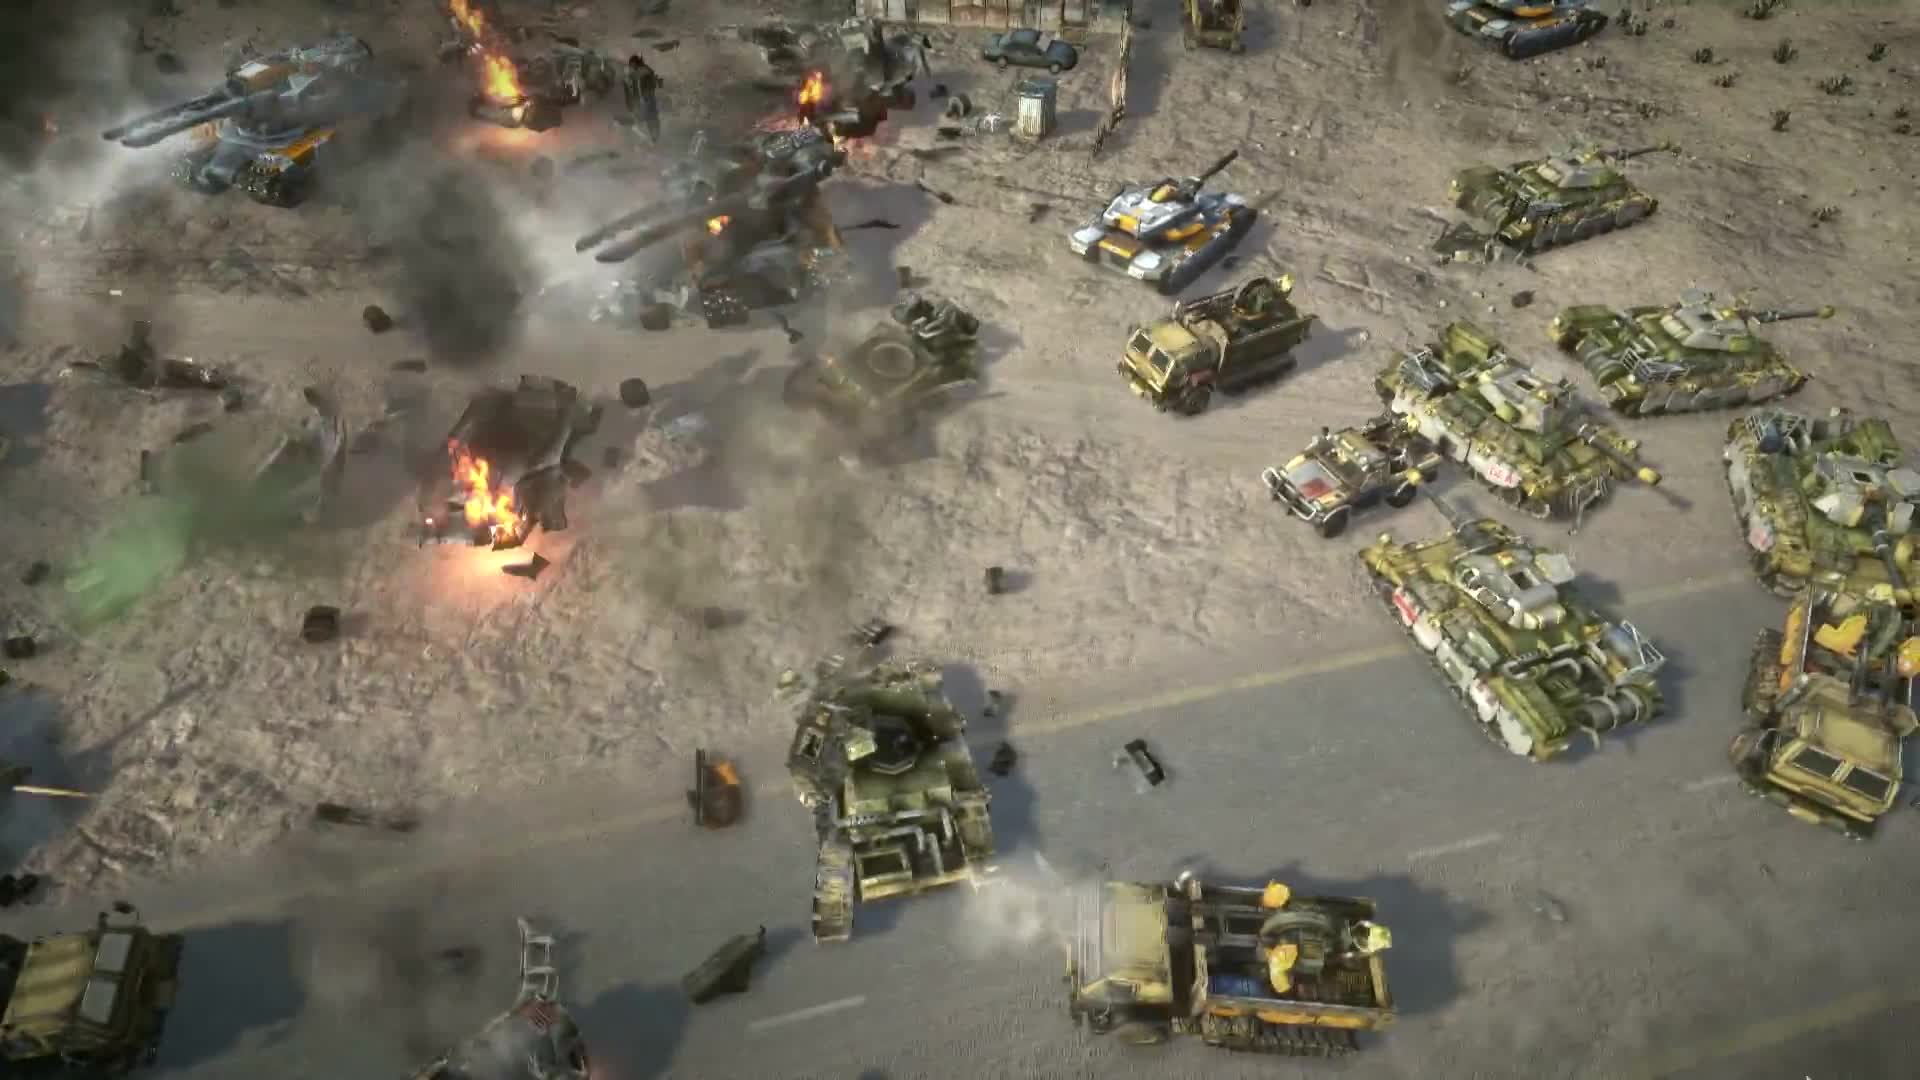 command and conquer like games on android